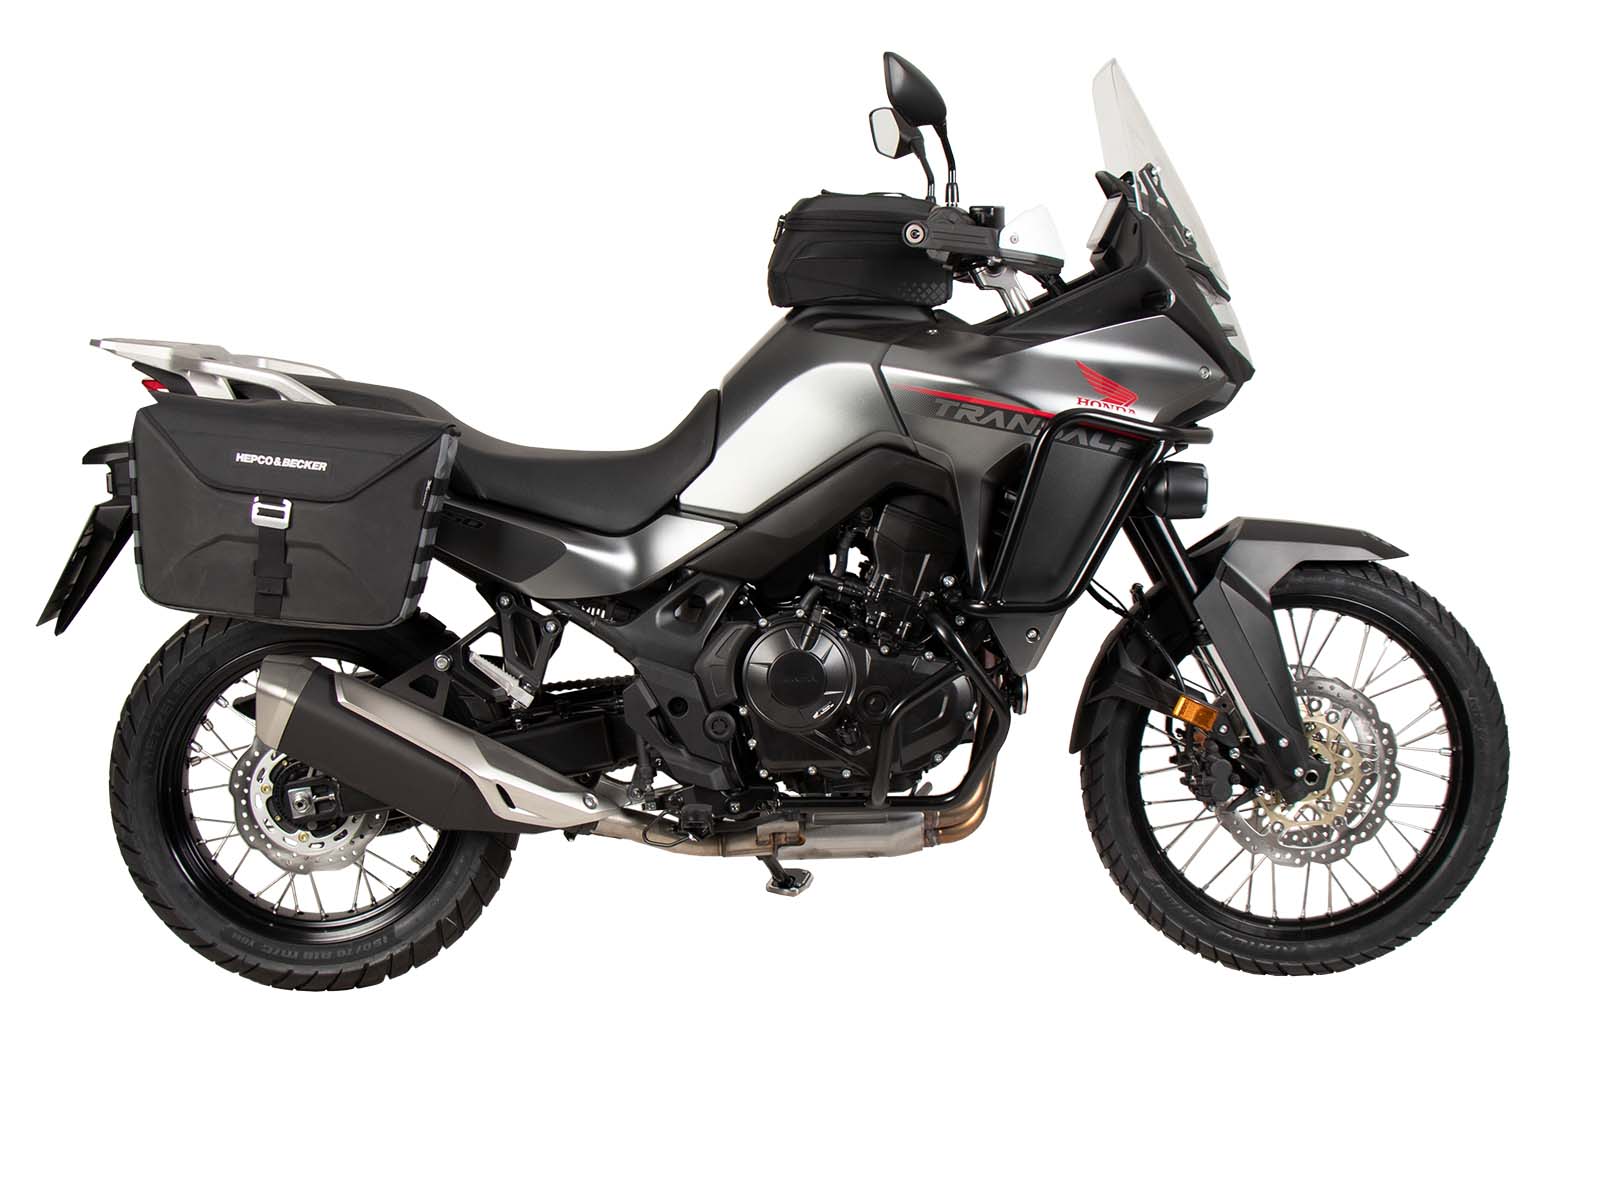 2023 Honda Transalp fitted with Hepco&Becker by Motorcycle Adventure Products Australia